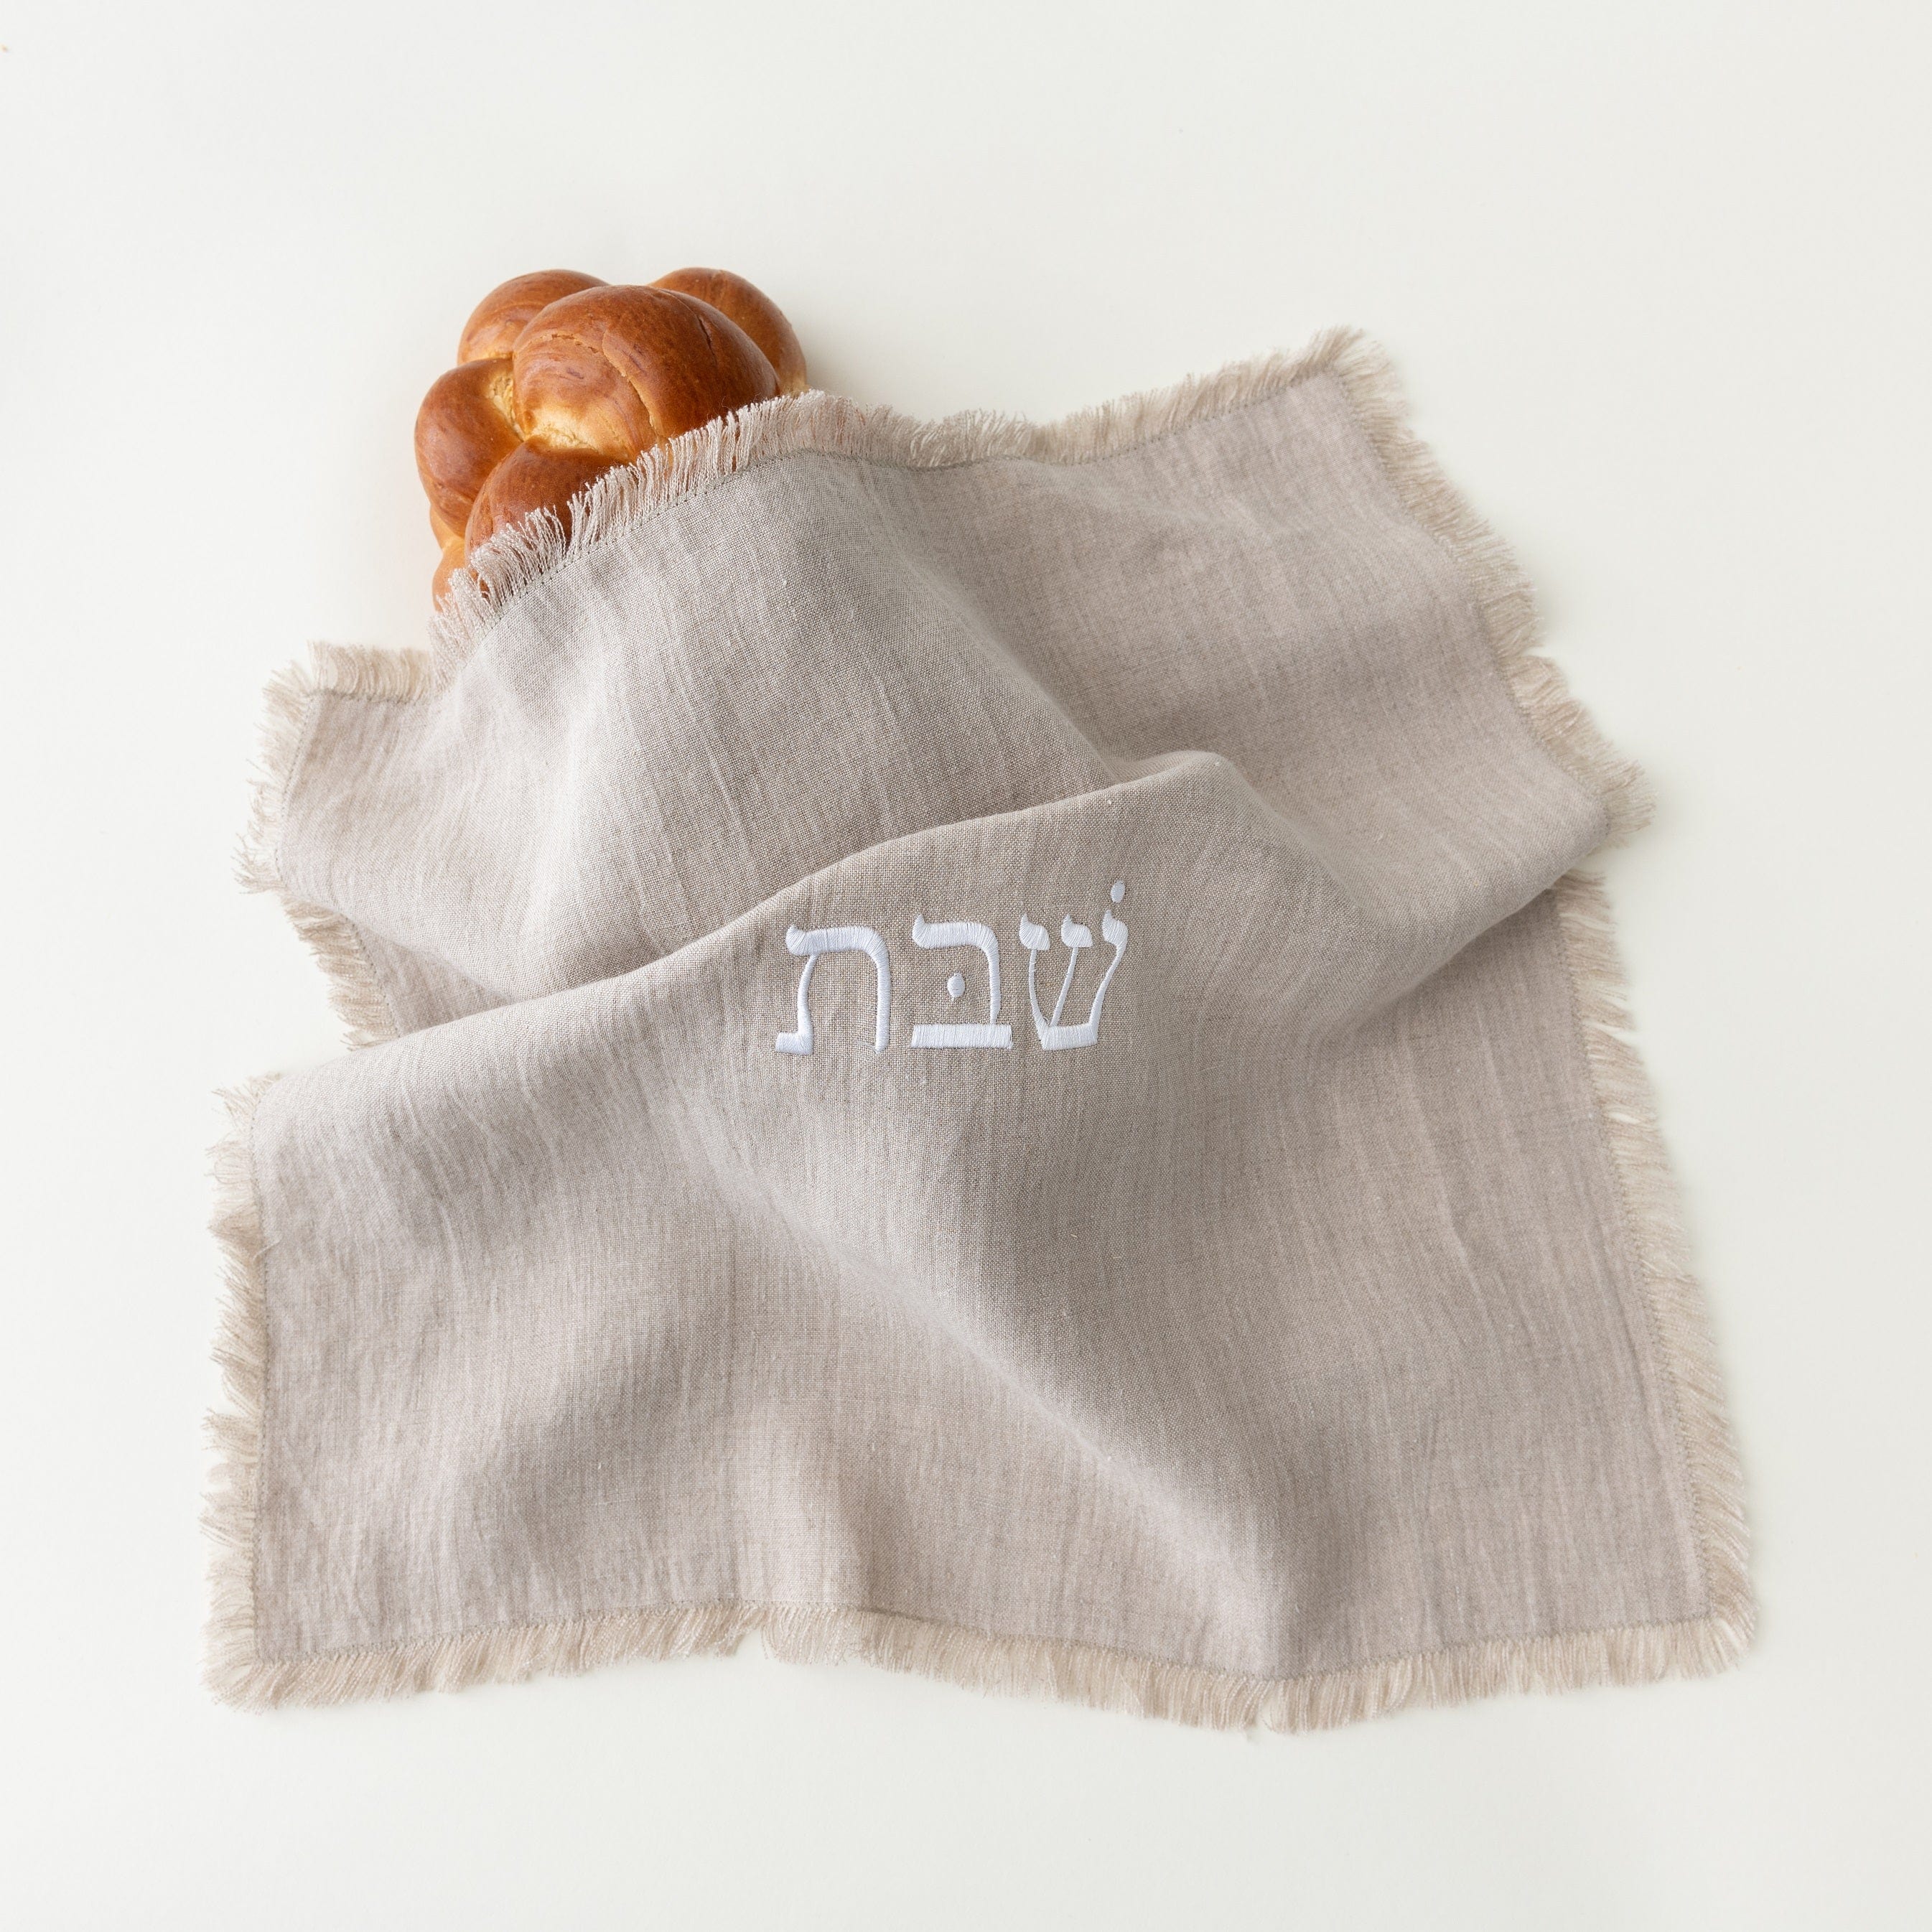 Embroidered Linen Challah Cover - Natural